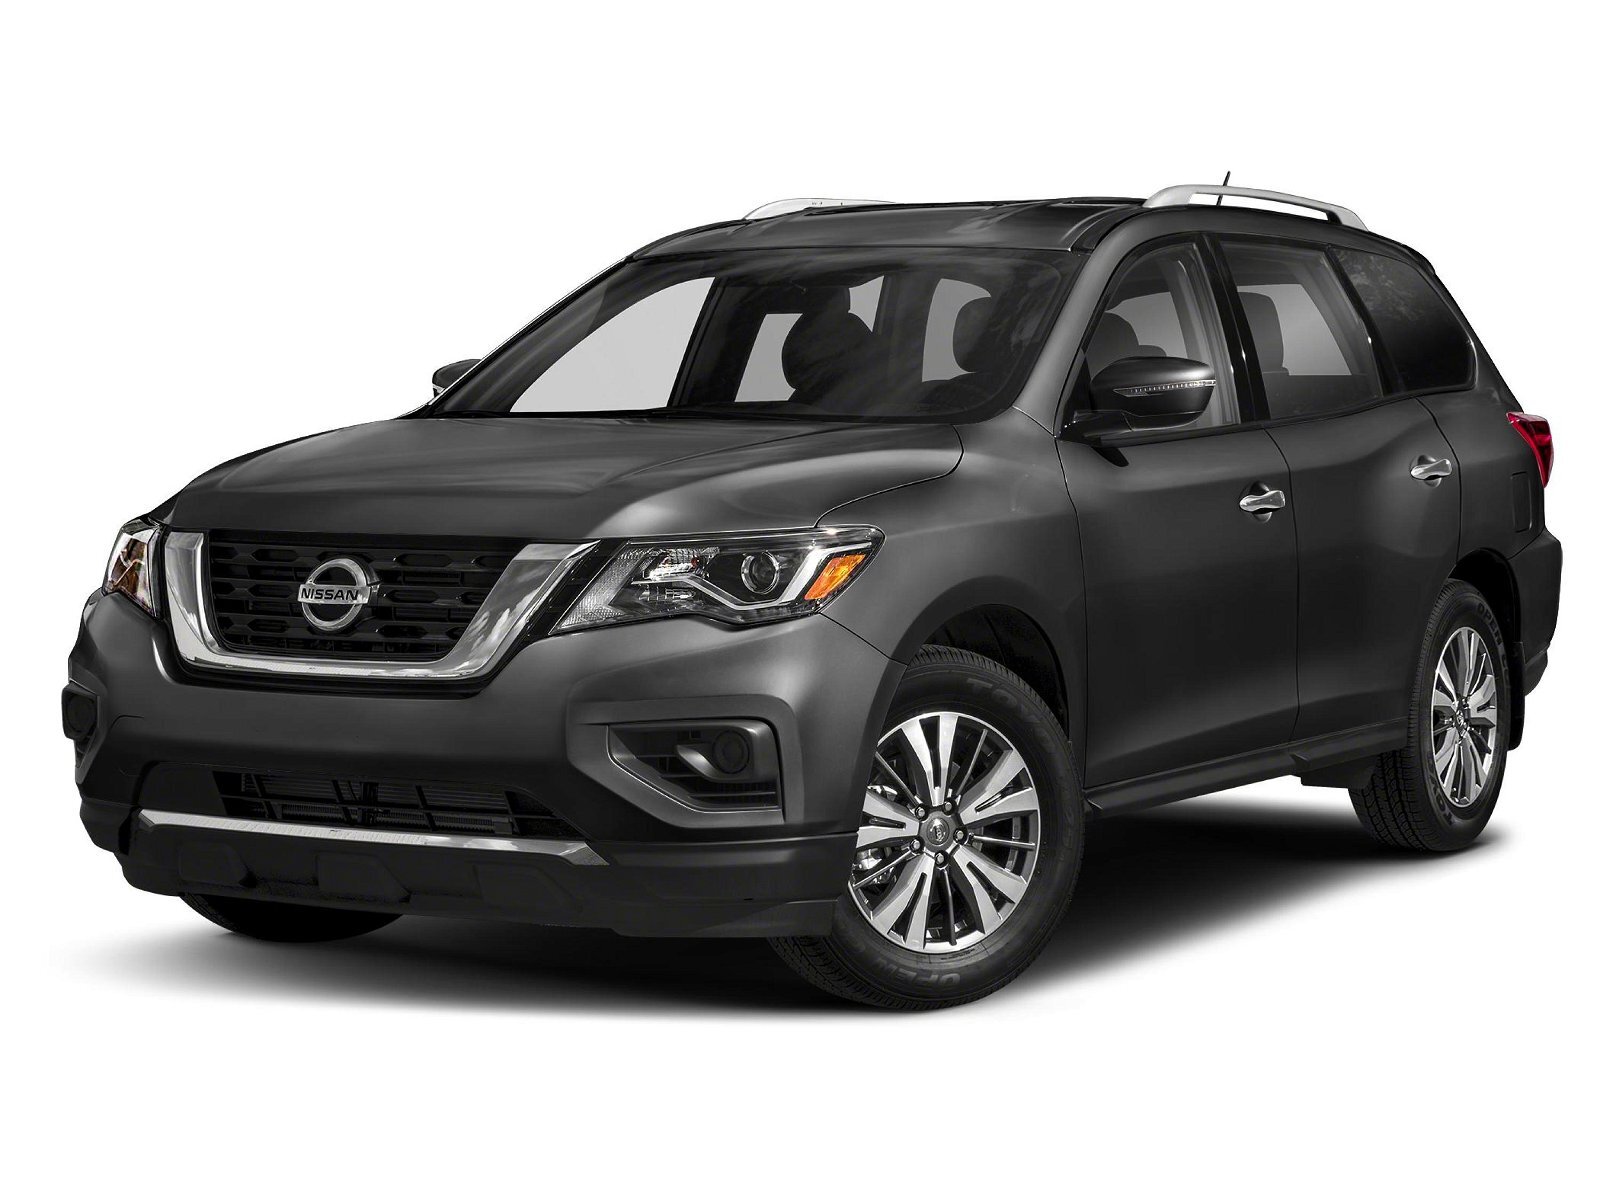 2019 Nissan Pathfinder SL Premium Locally Owned | One Owner | Low KM's